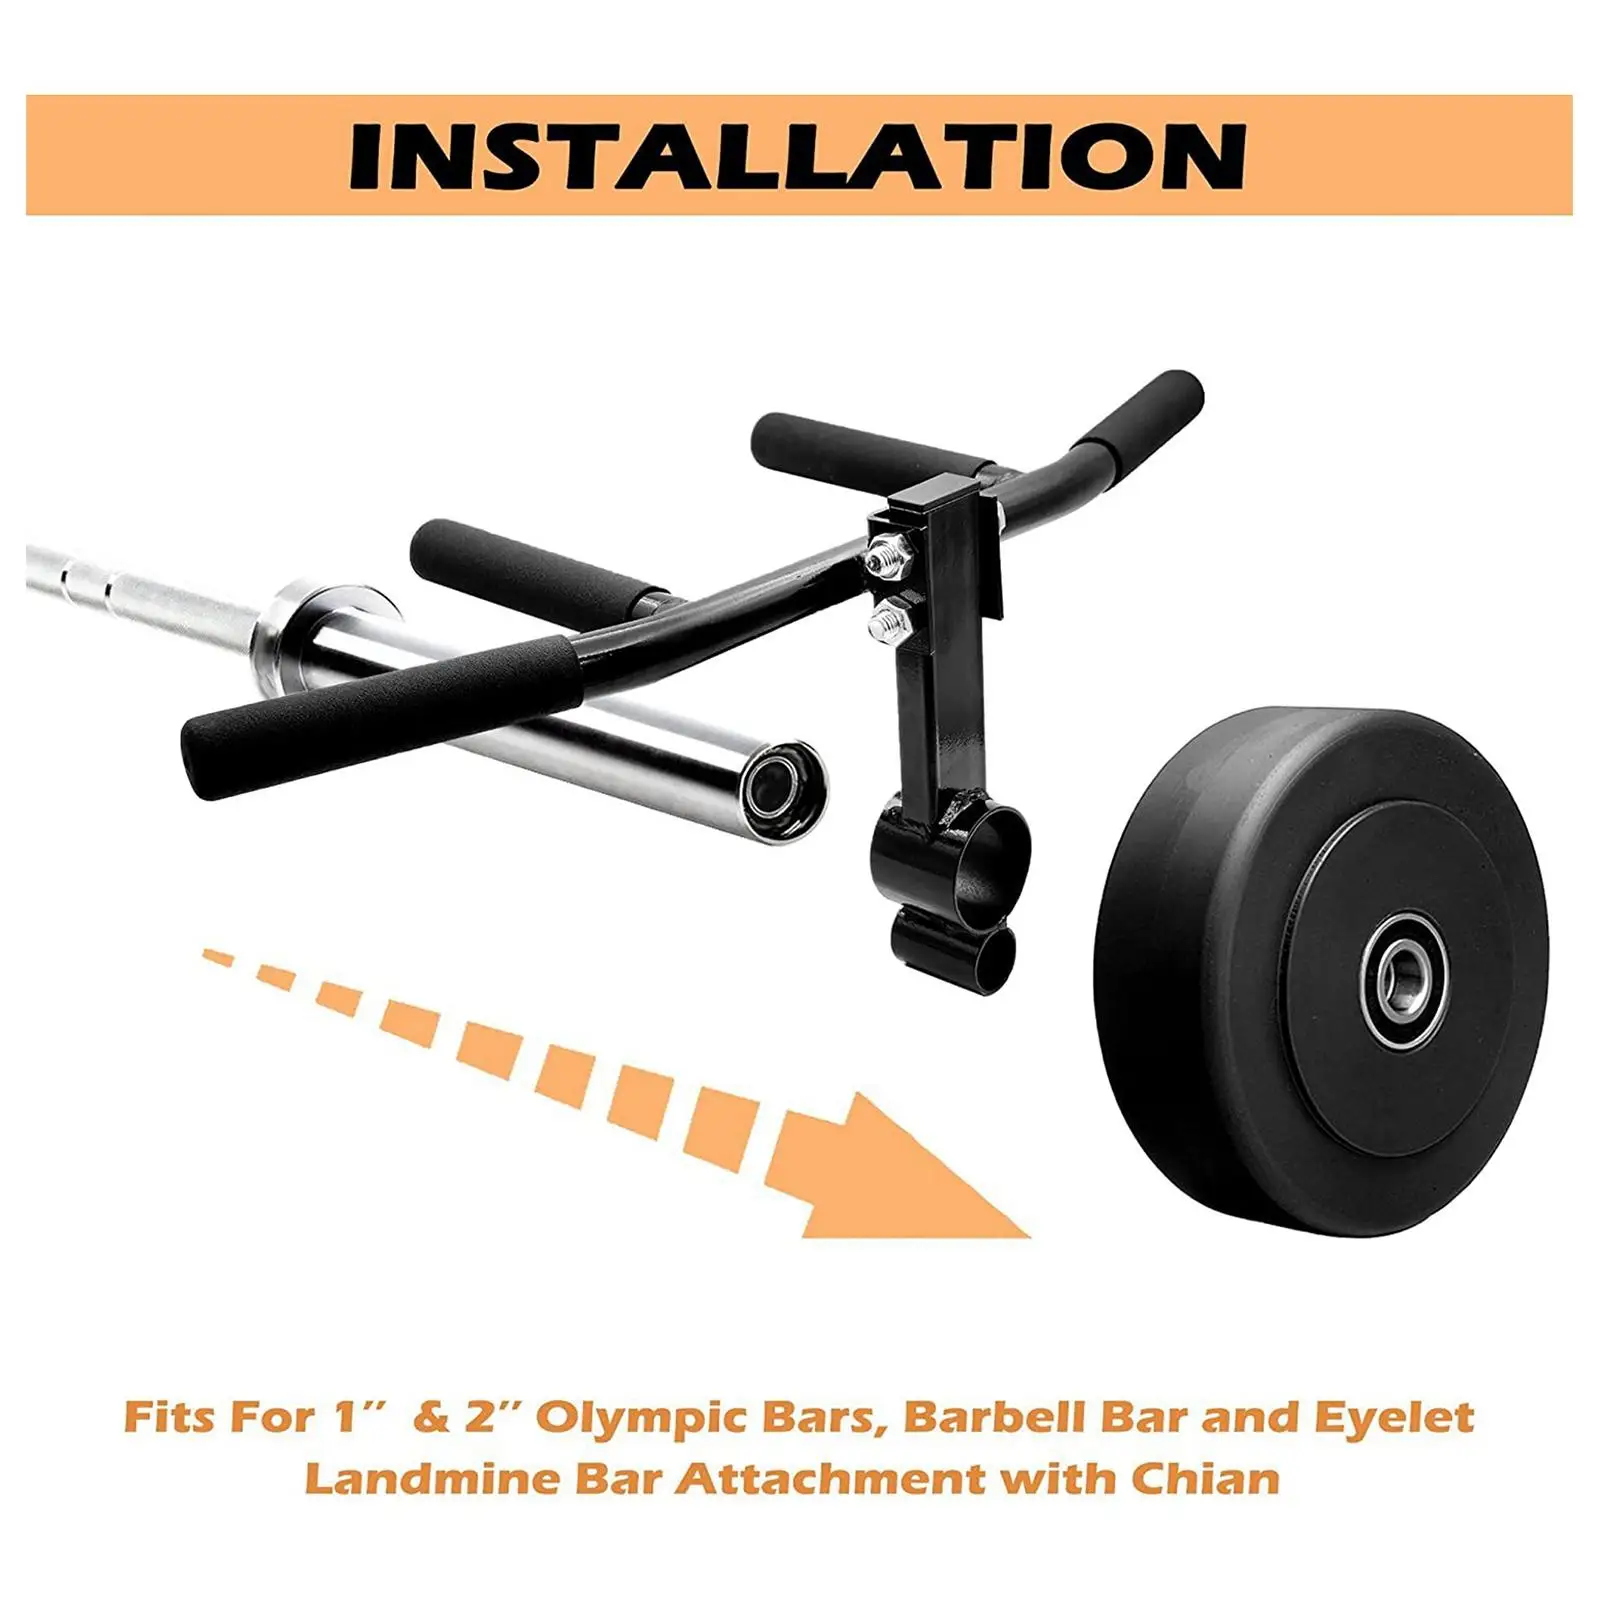 Bar Row Platform Barbell Attachment Easy to Install Landmine Barbell Handle for Exercises